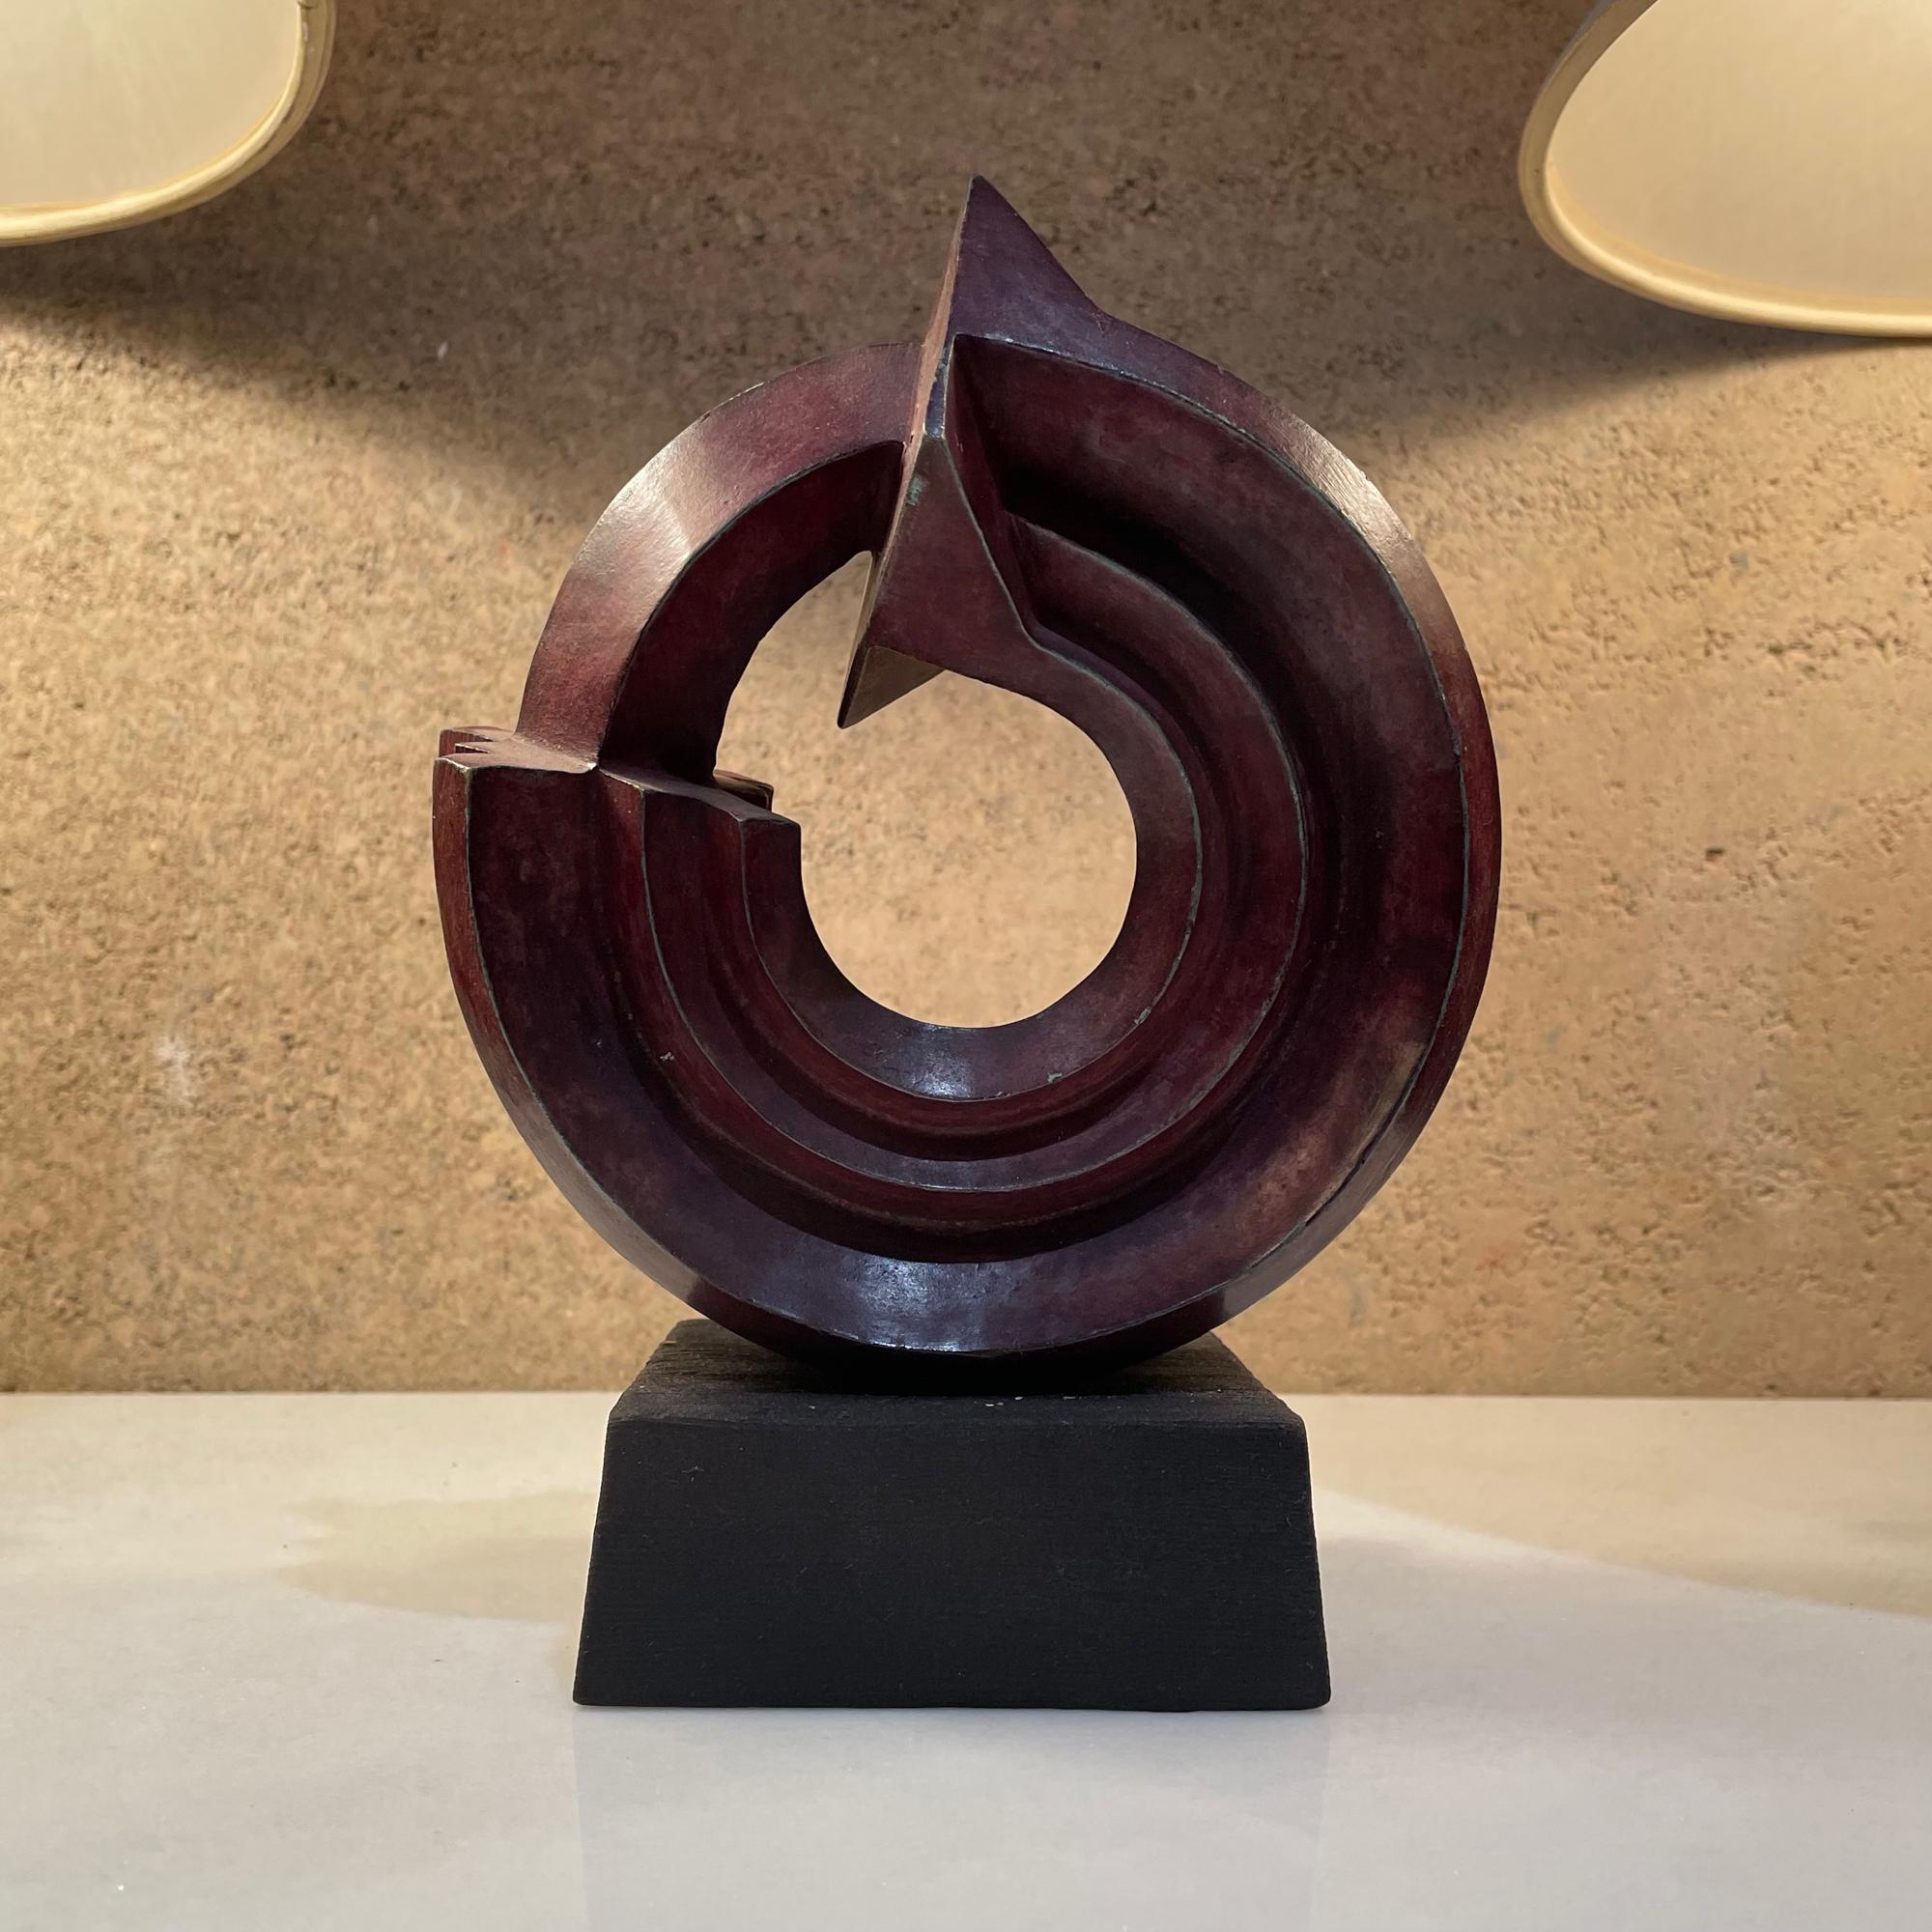 Ambianic presents:
Modern abstract sculpture by Sebastian internationally known sculptor born Enrique Carbajal González from Mexico. 
Sculpture is signed and numbered SEBASTIAN 2003 160/750. Refer to our image.
Patinated bronze red patina mounted